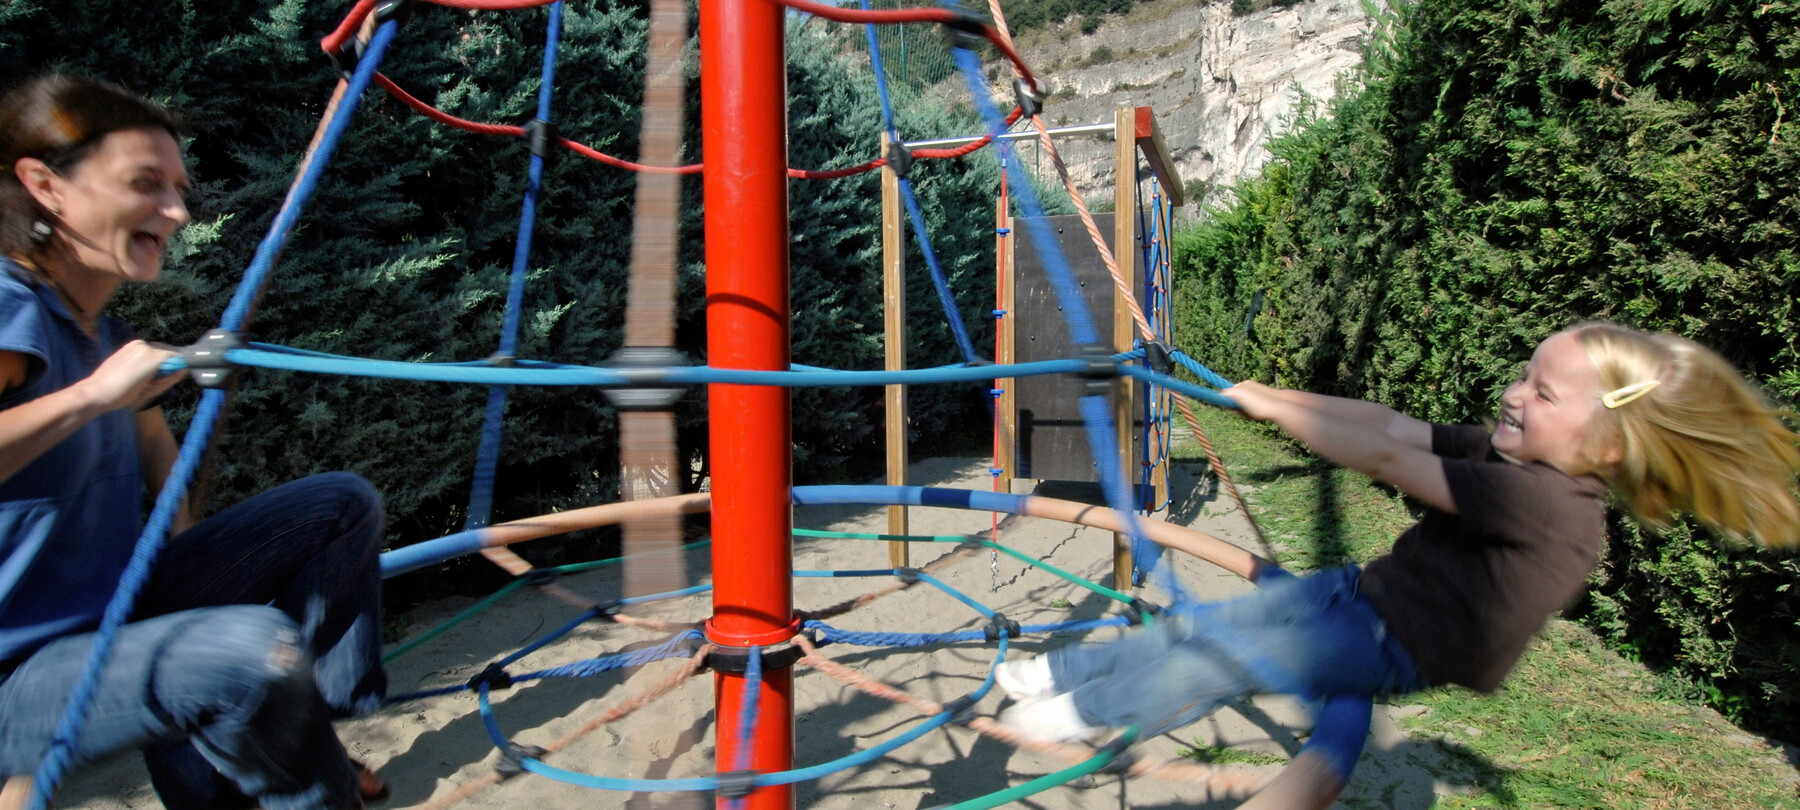 Hotels with playgrounds